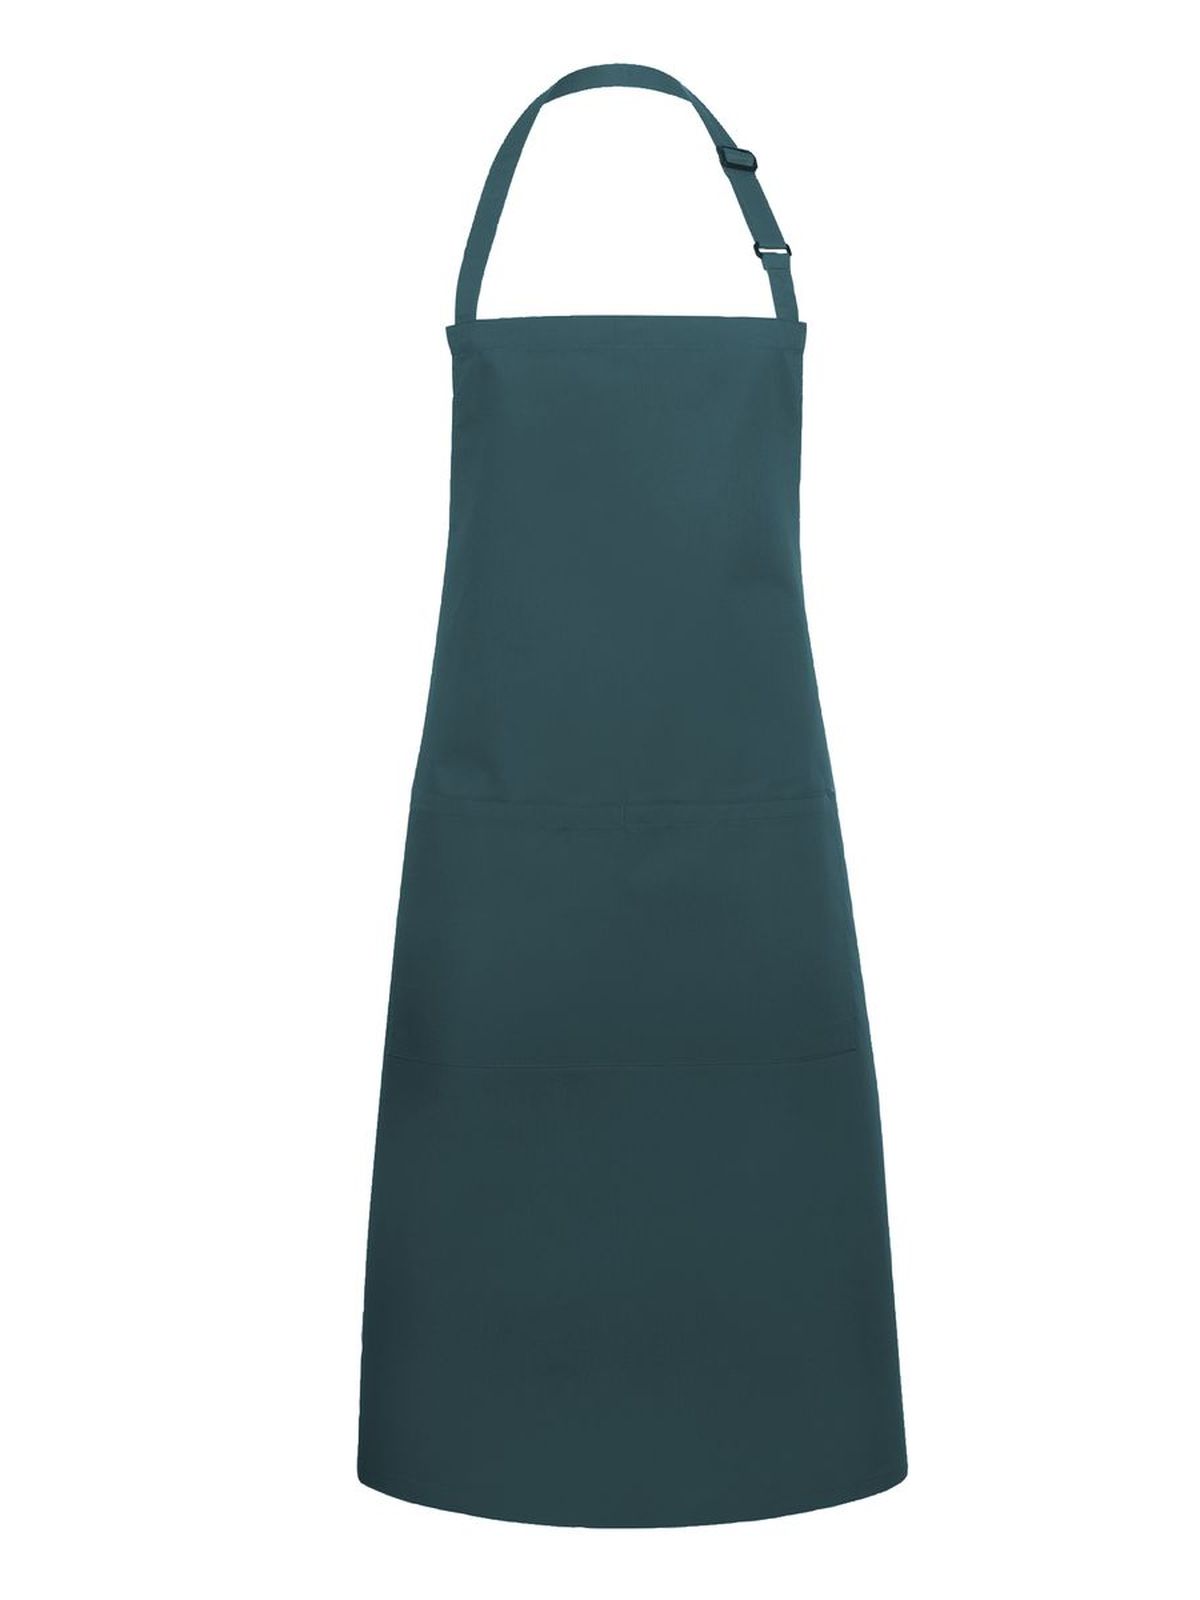 bistro-apron-basic-with-buckle-and-pocket-pine-green.webp